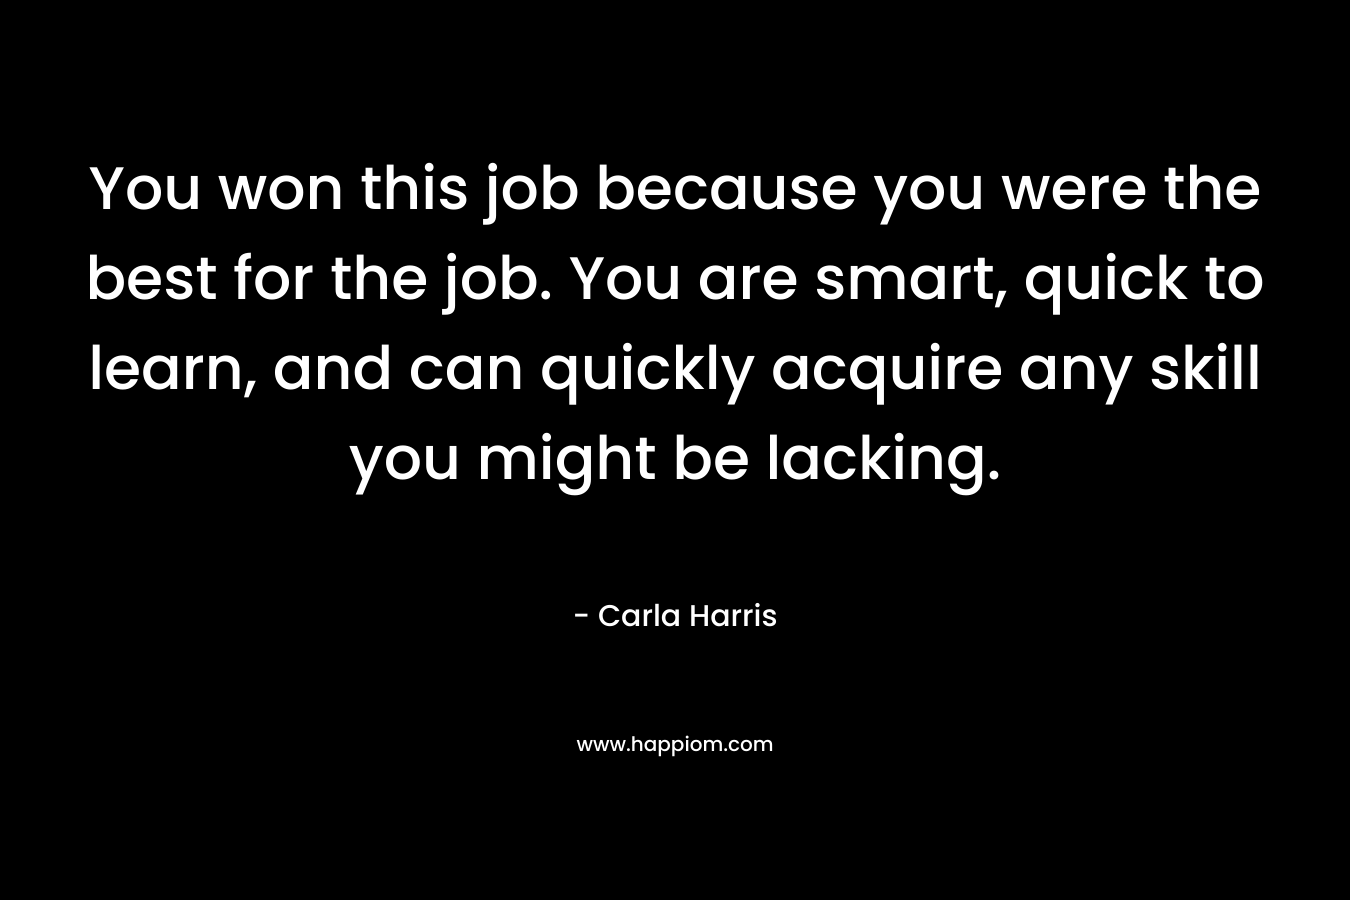 You won this job because you were the best for the job. You are smart, quick to learn, and can quickly acquire any skill you might be lacking.